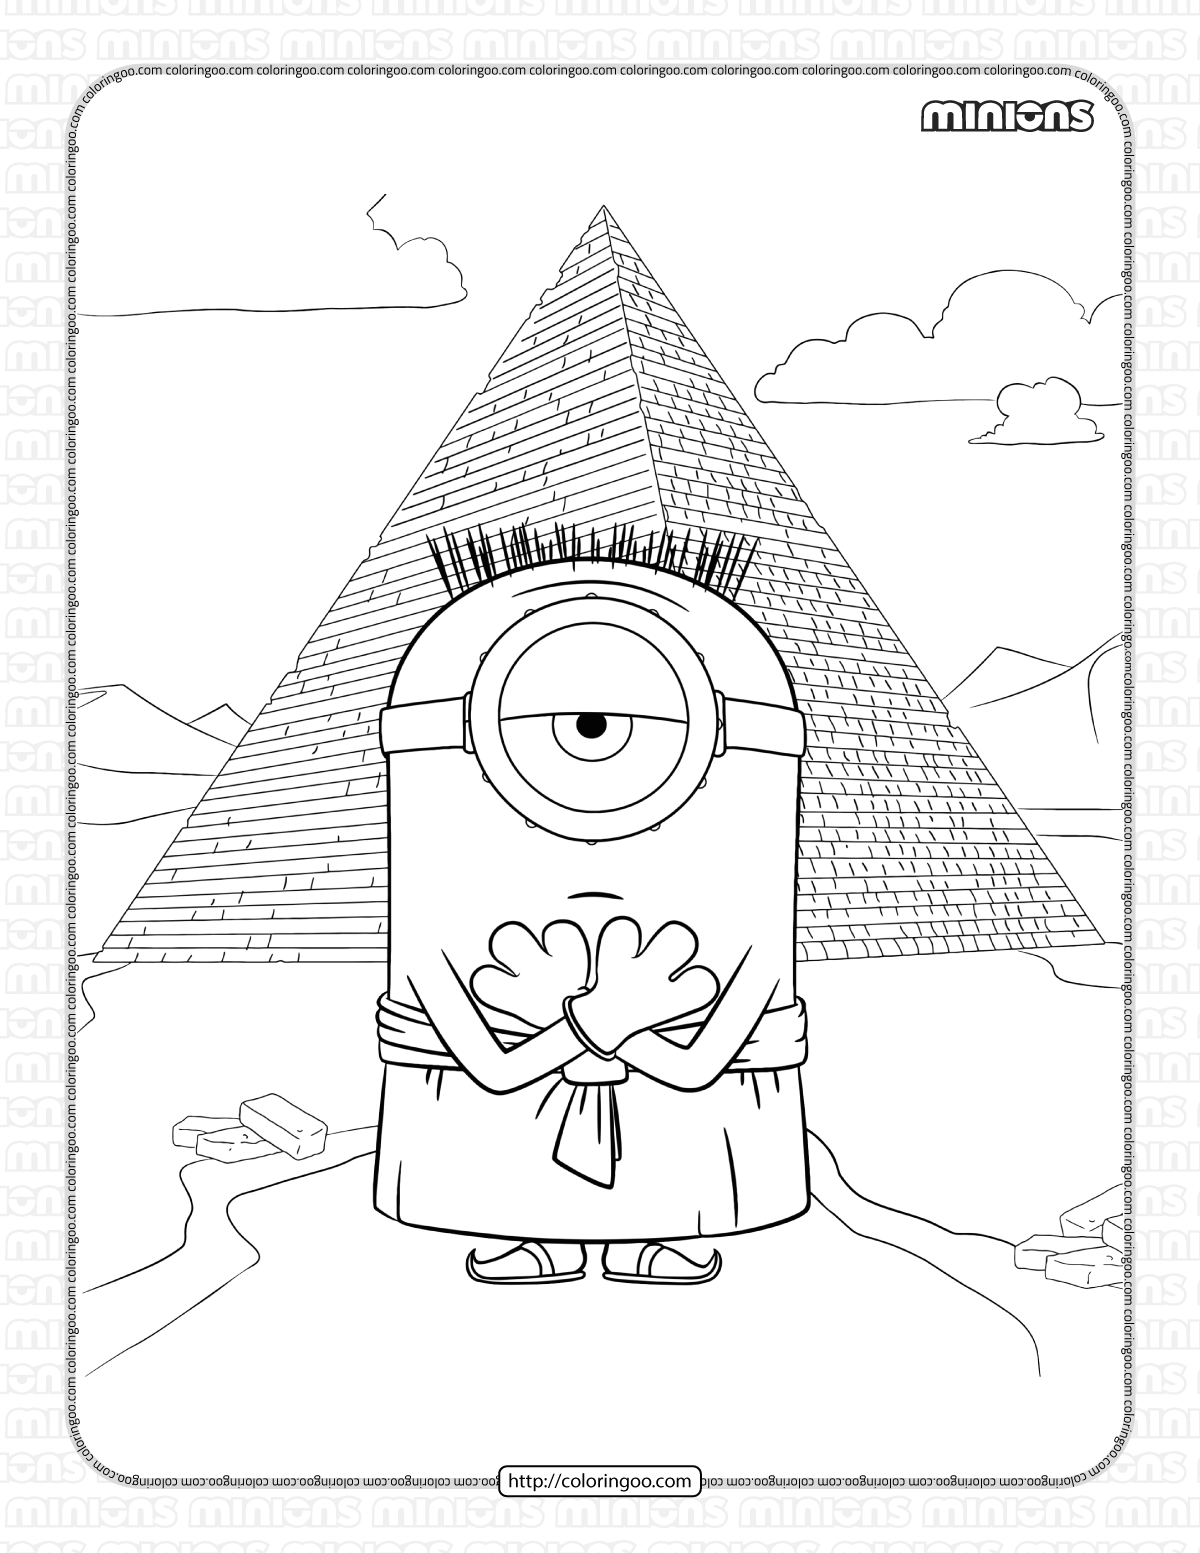 minion chris in the egyptian pyramids coloring page